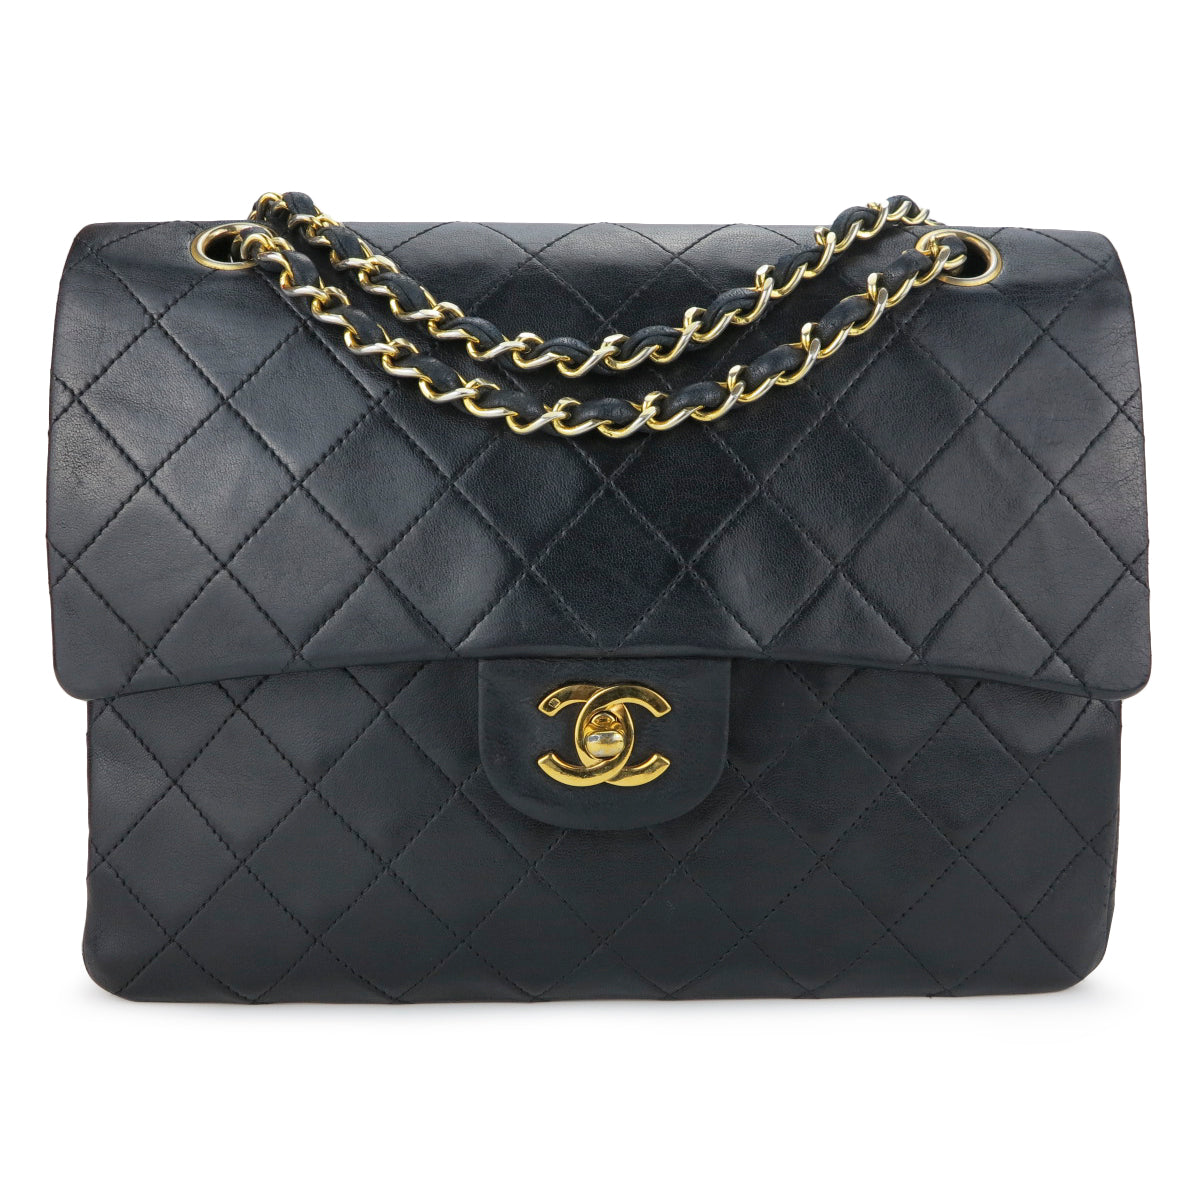 CHANEL Medium Vintage Classic Square Double Flap Bag in Black